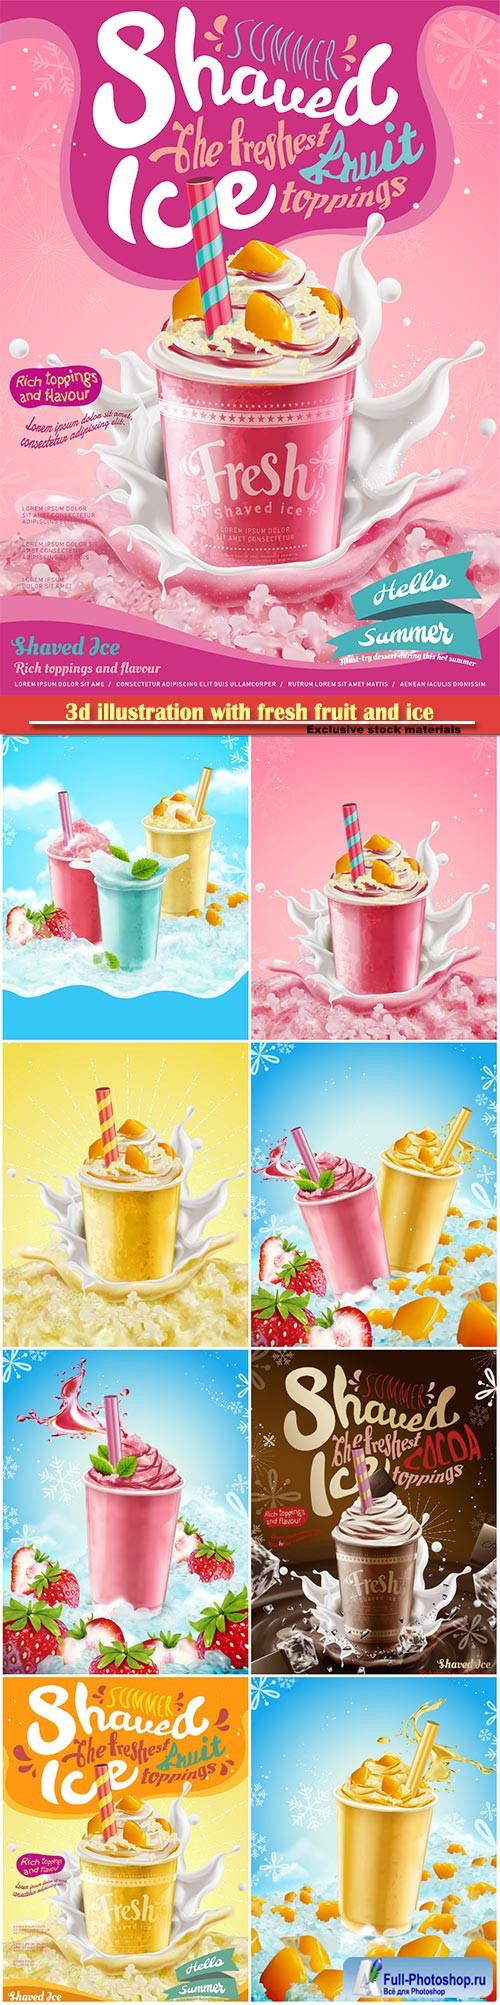 3d illustration with fresh fruit and ice elements, syrup ice shaved ads with creamy topping and splashing